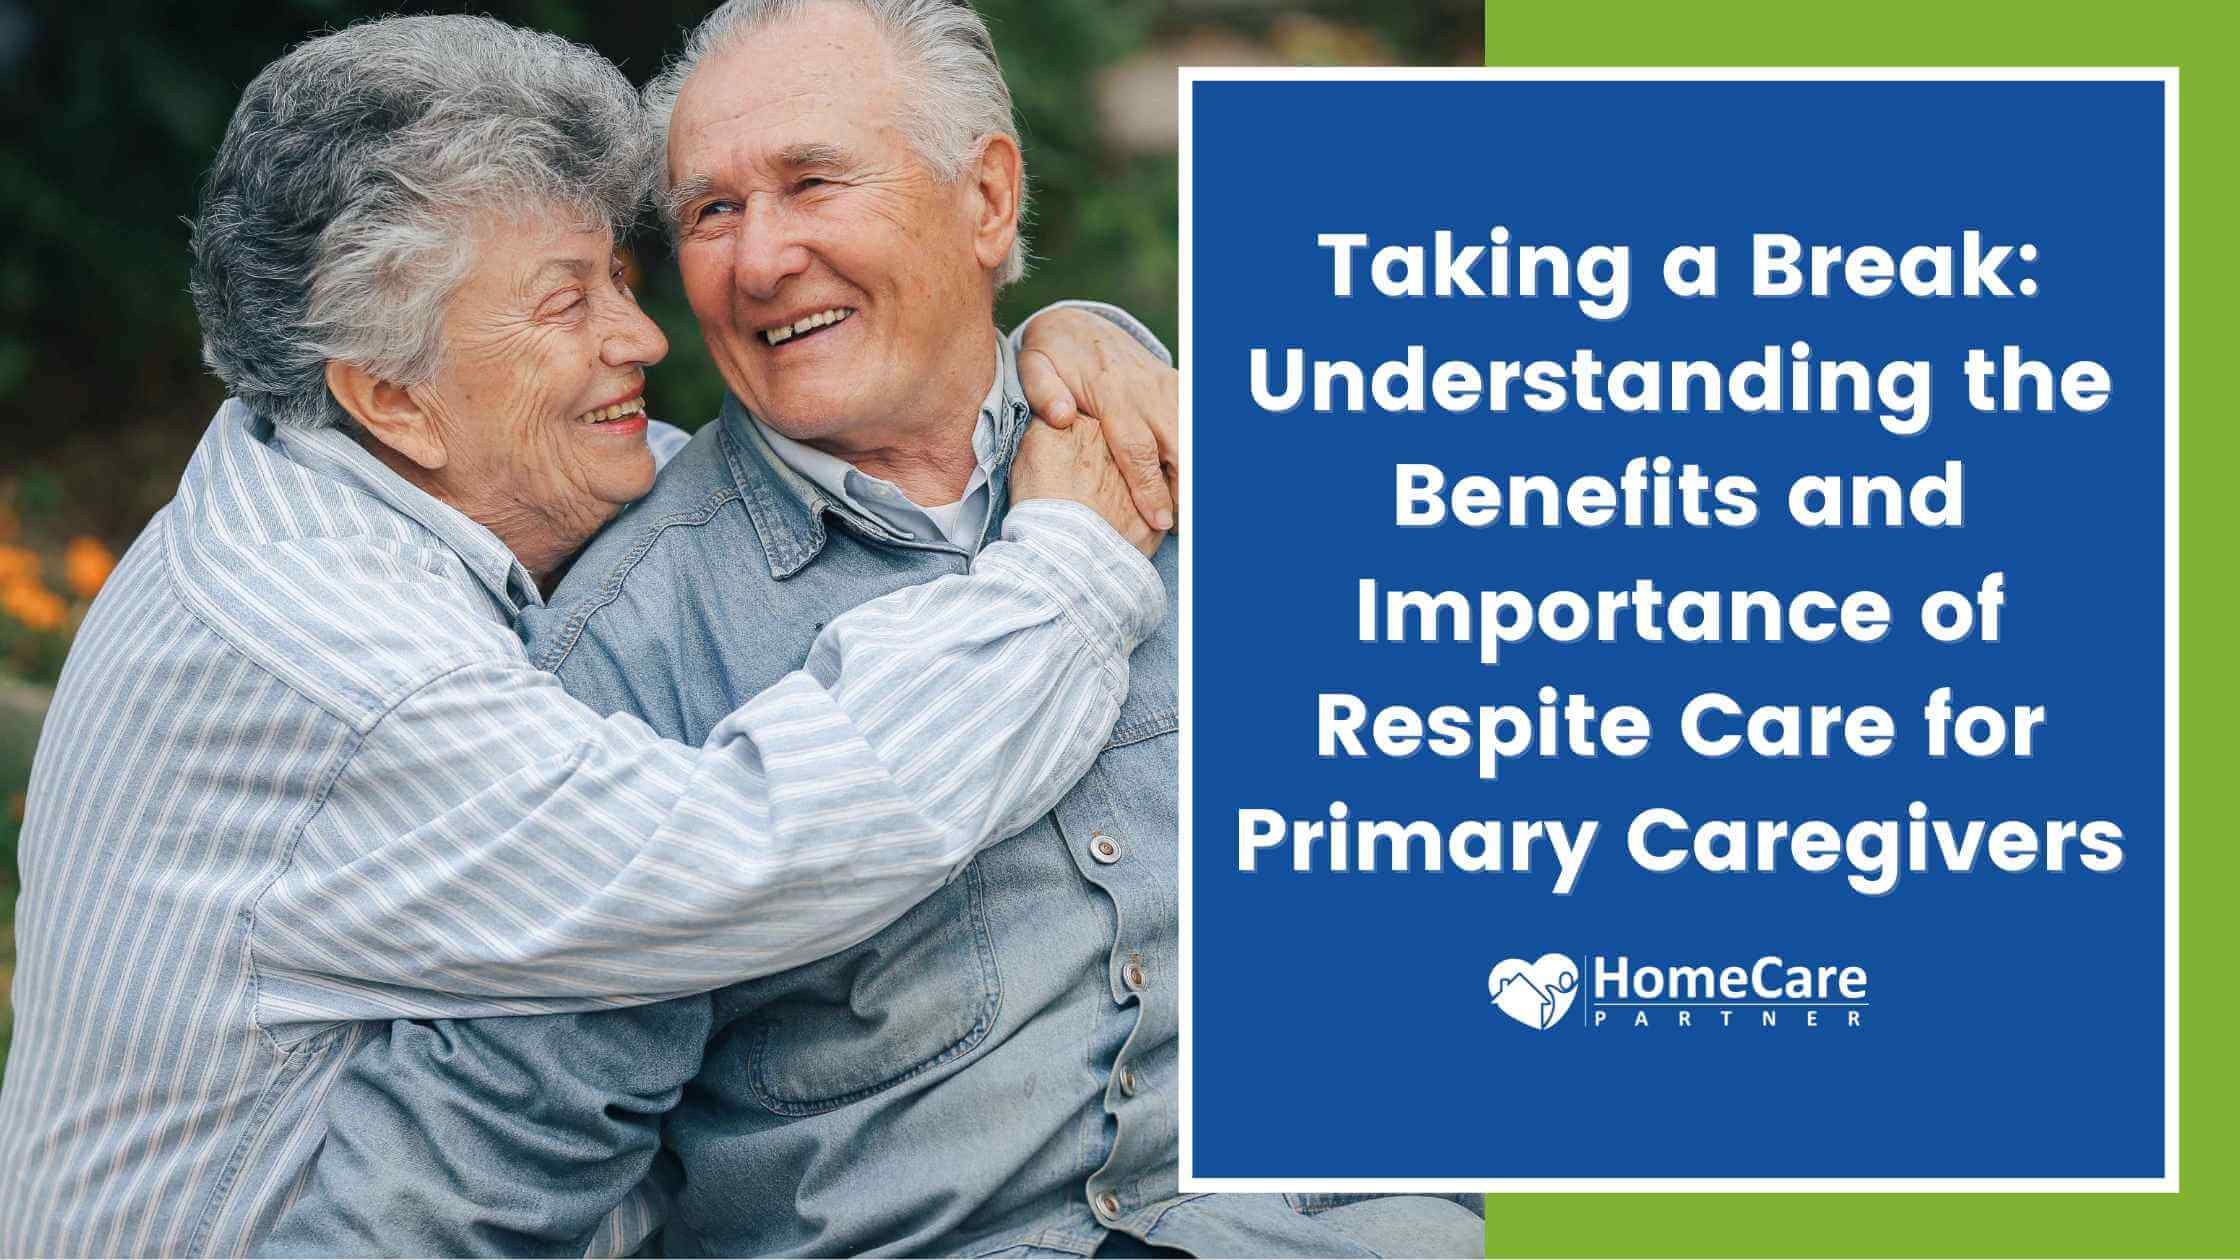 Taking a Break: Understanding the Benefits and Importance of Respite Care for Primary Caregivers